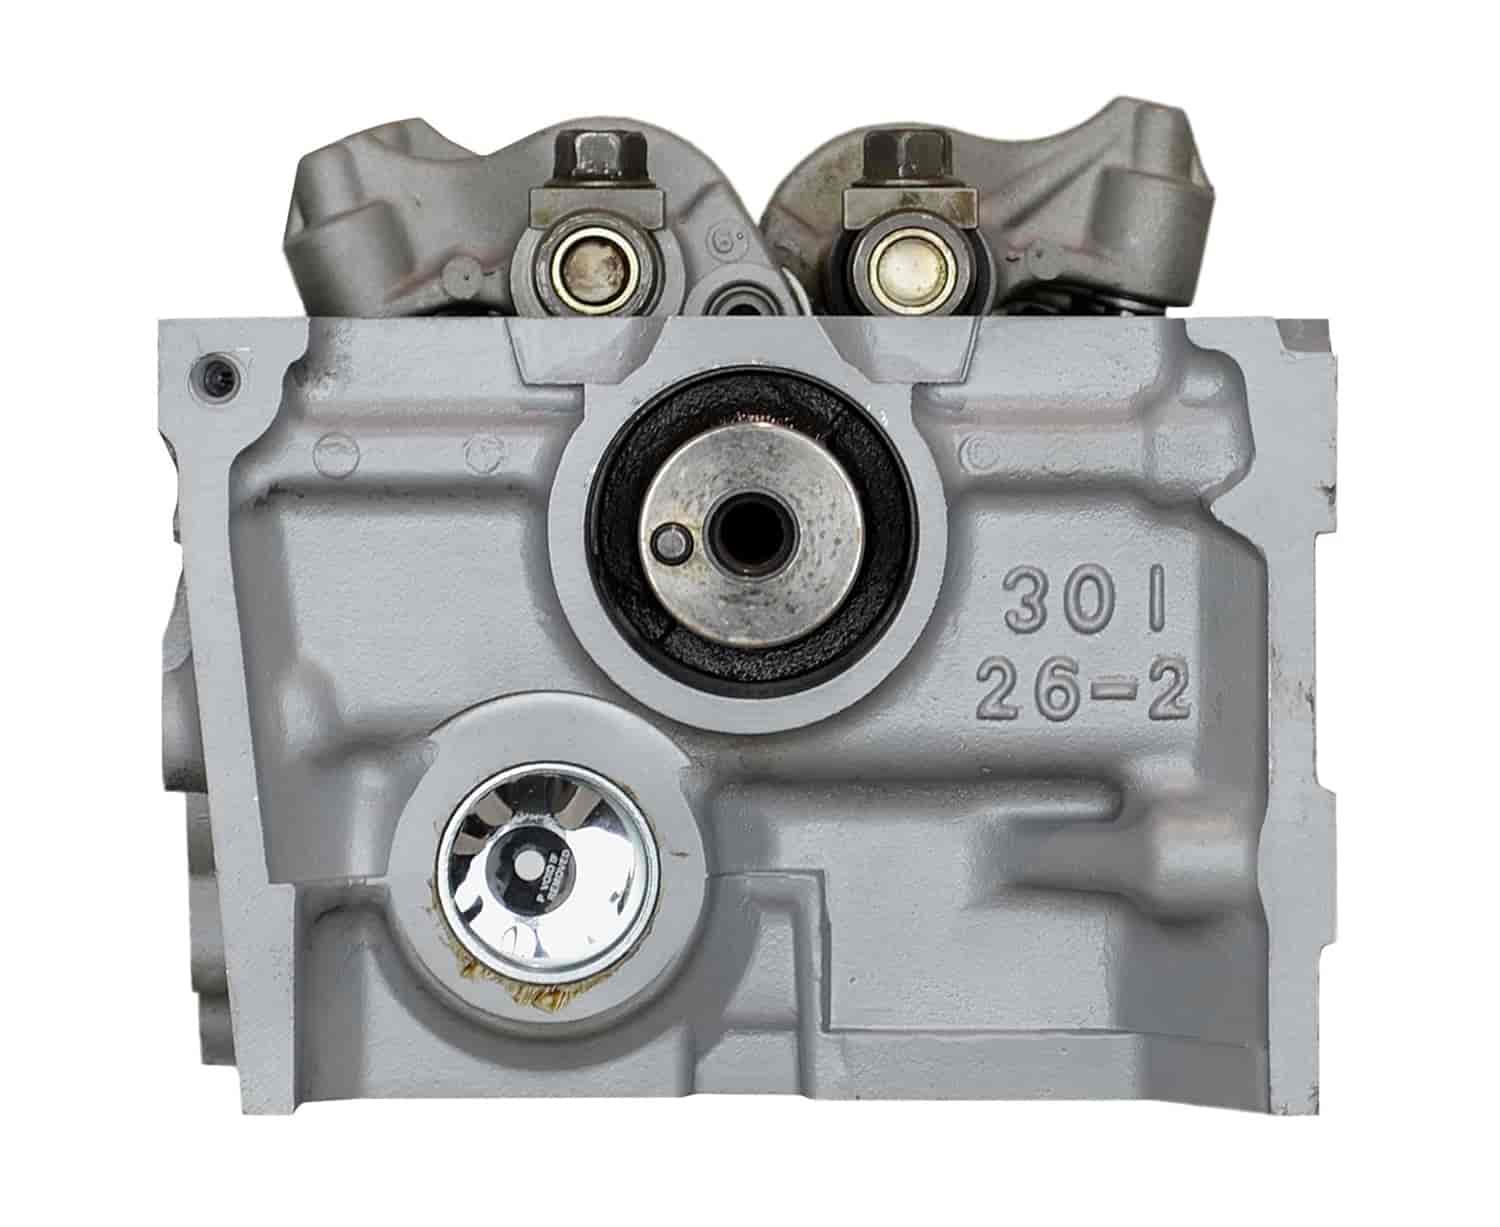 Remanufactured Cylinder Head for 1994-1997 Ford Aspire with 1.3L L4